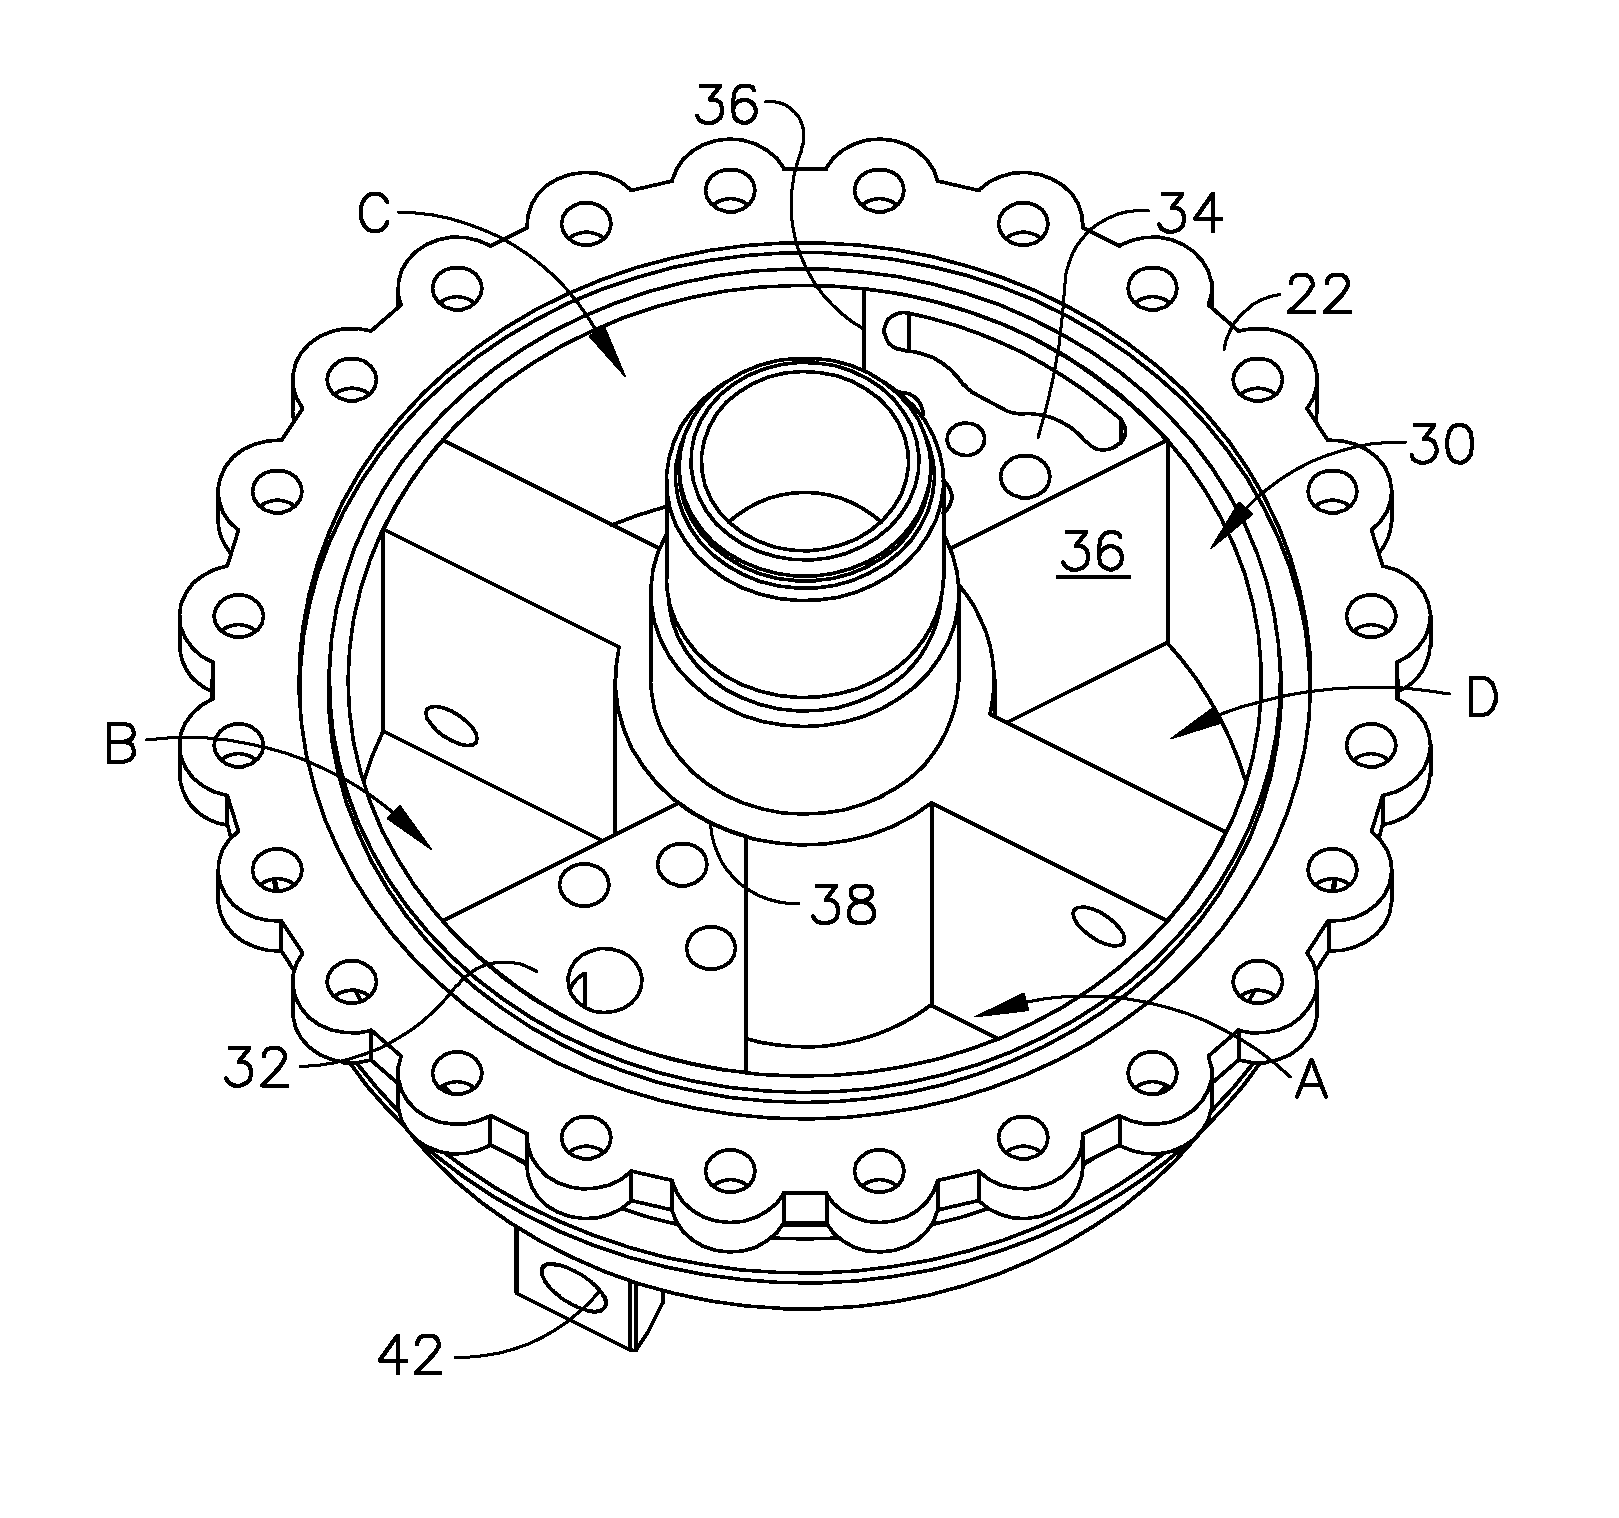 Rotary hydraulic actuator with hydraulically controlled position limits